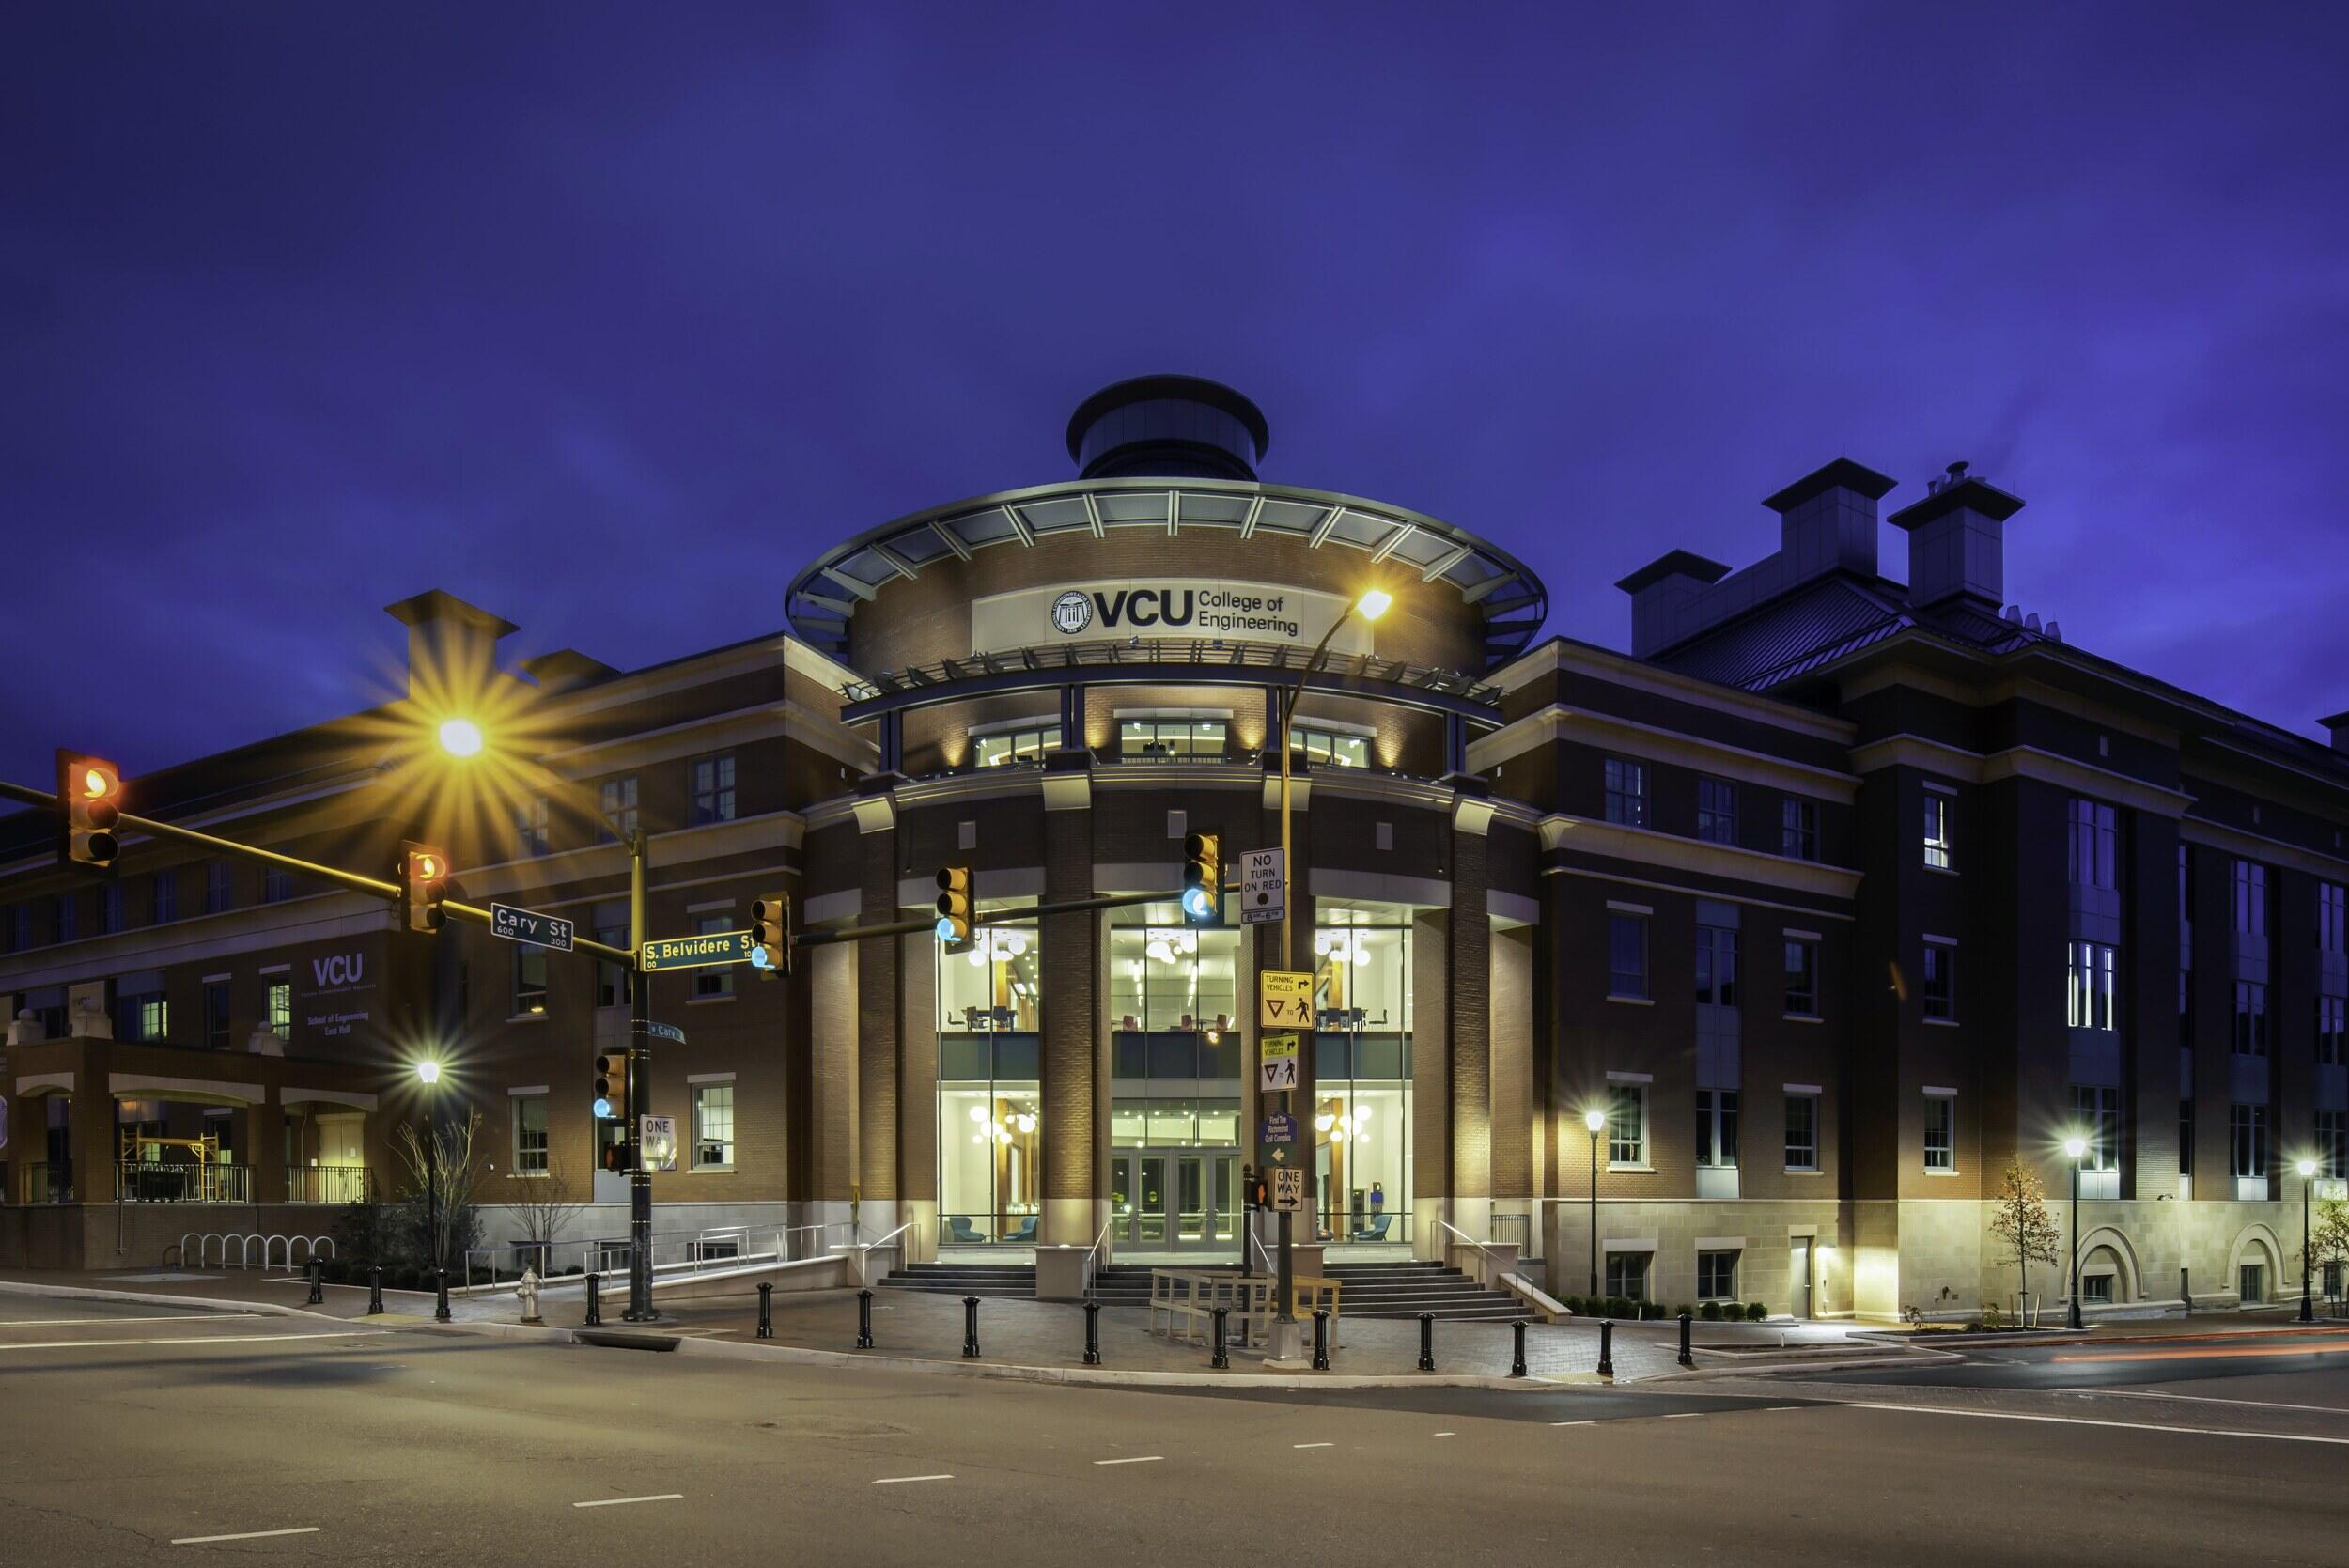 An exterior photo of a VCU College of Engineering building lit up at night.